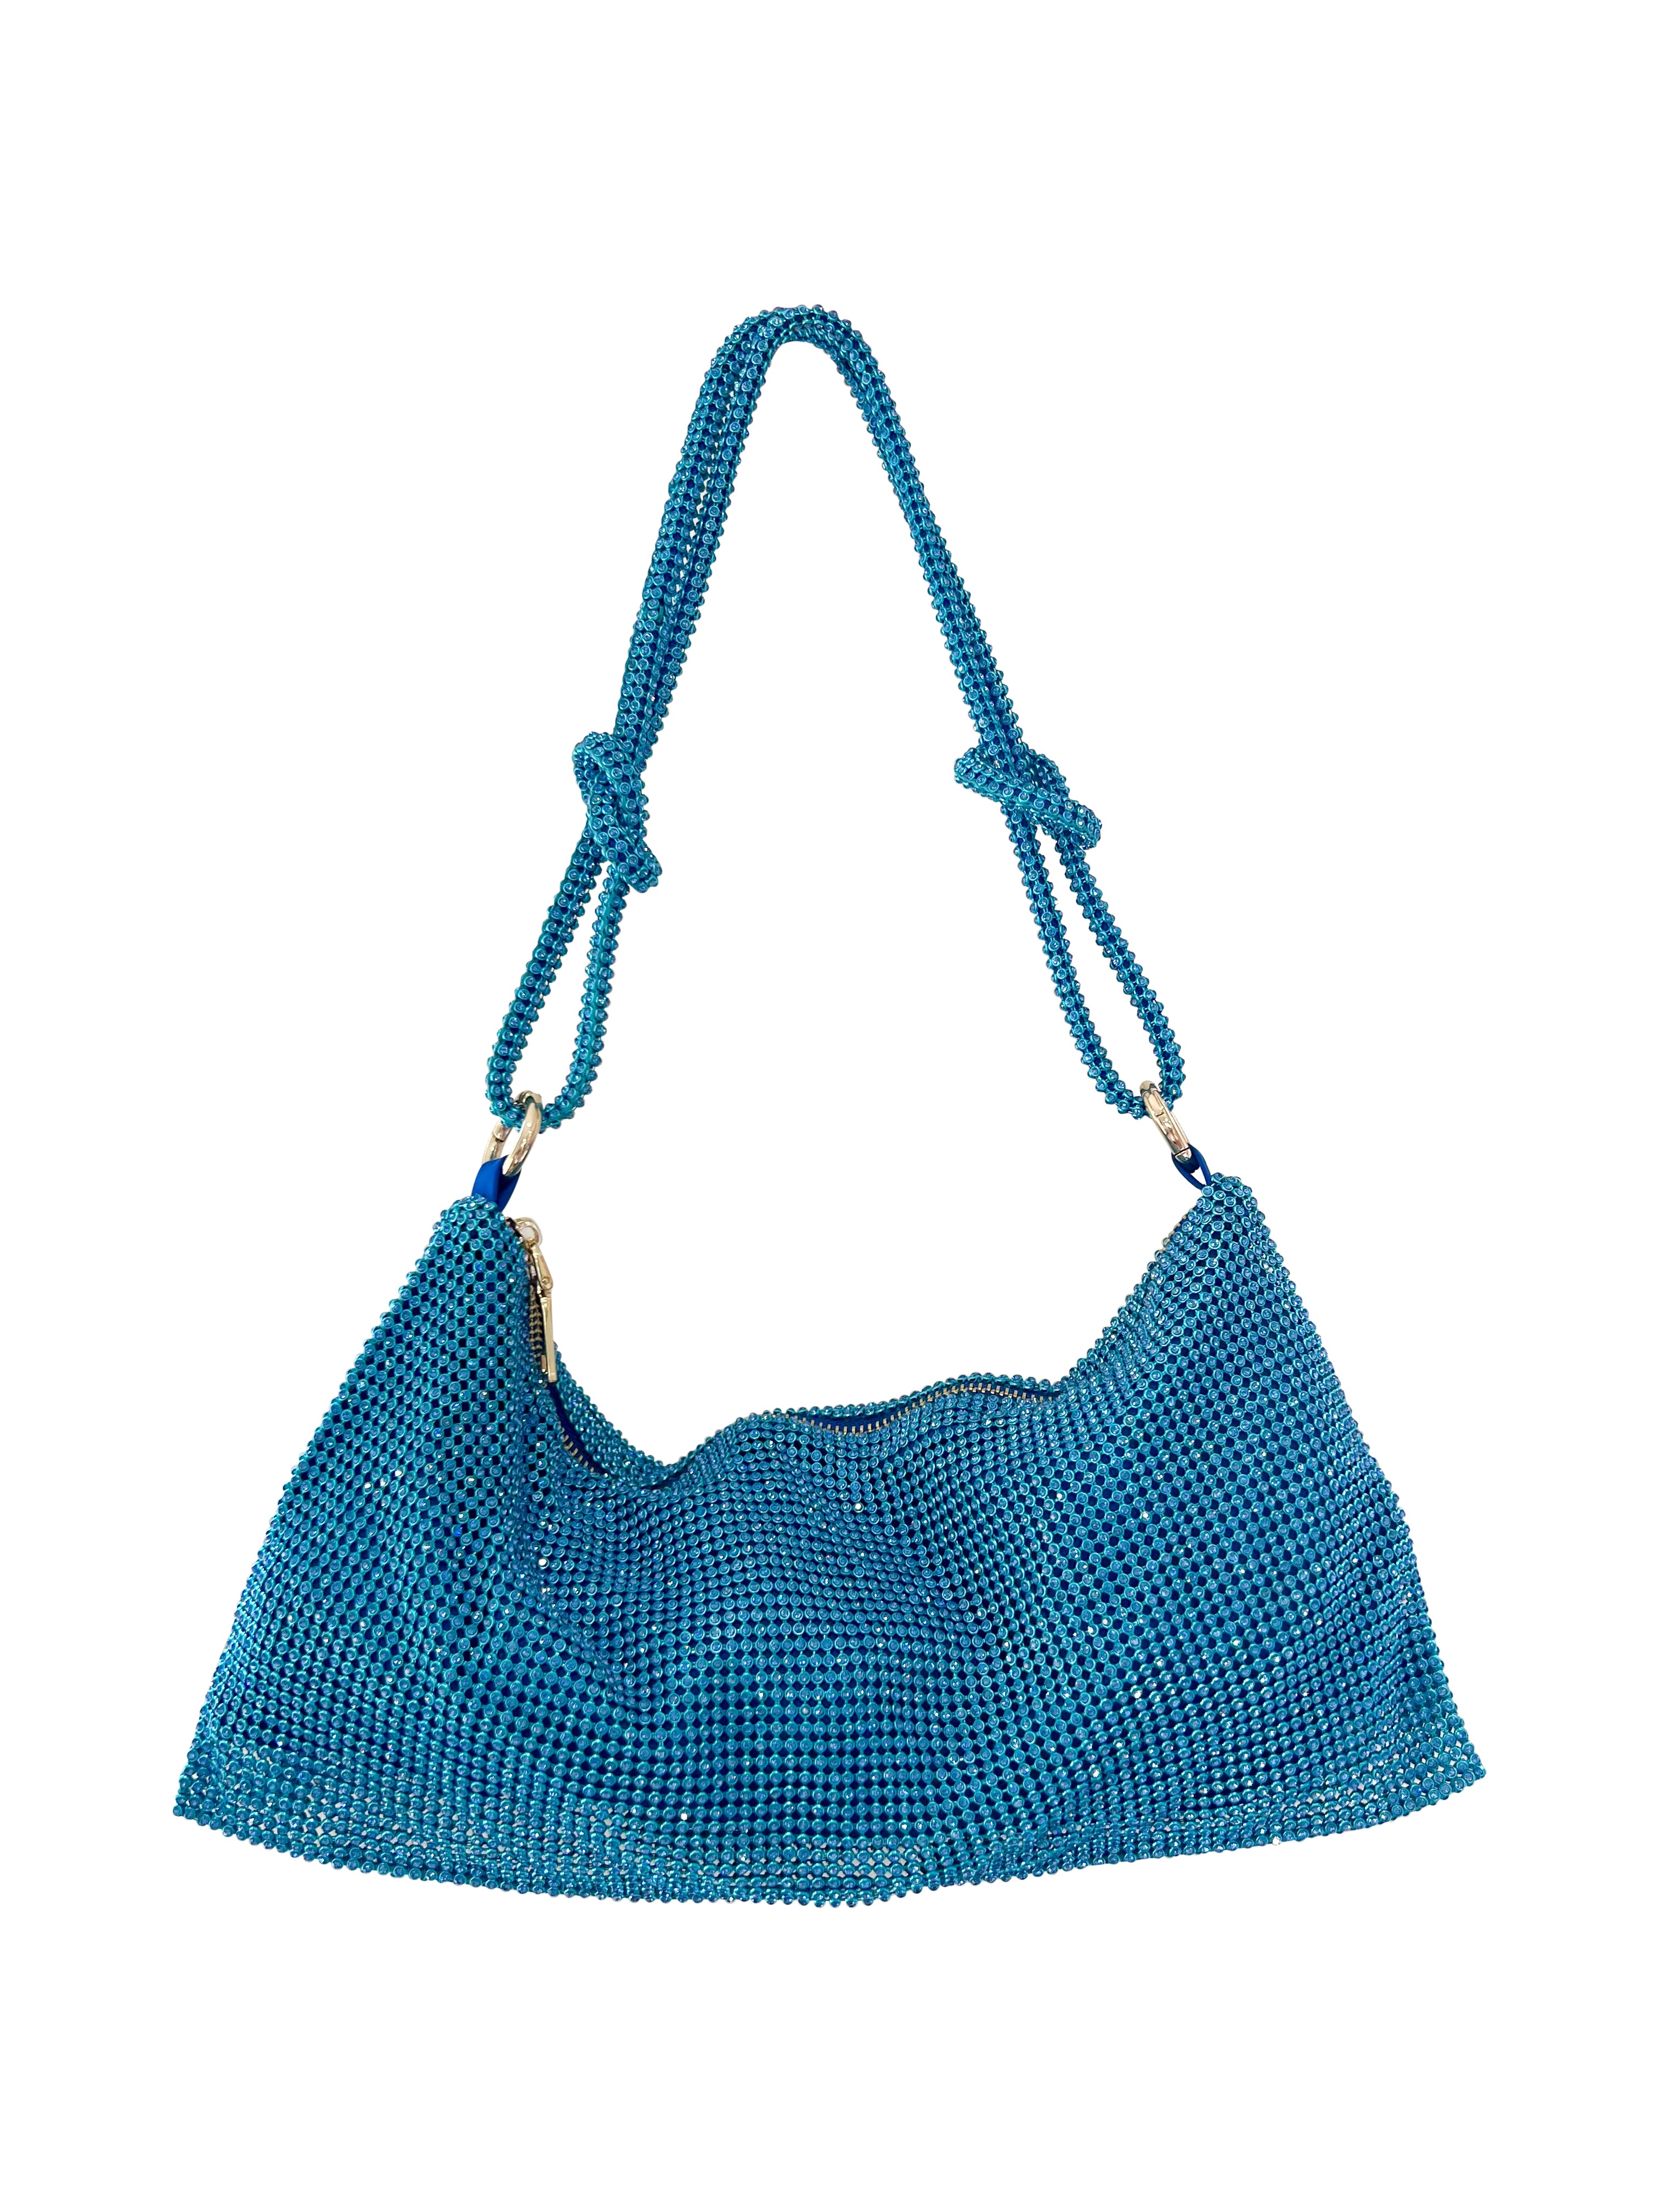 Party Bag in Teal